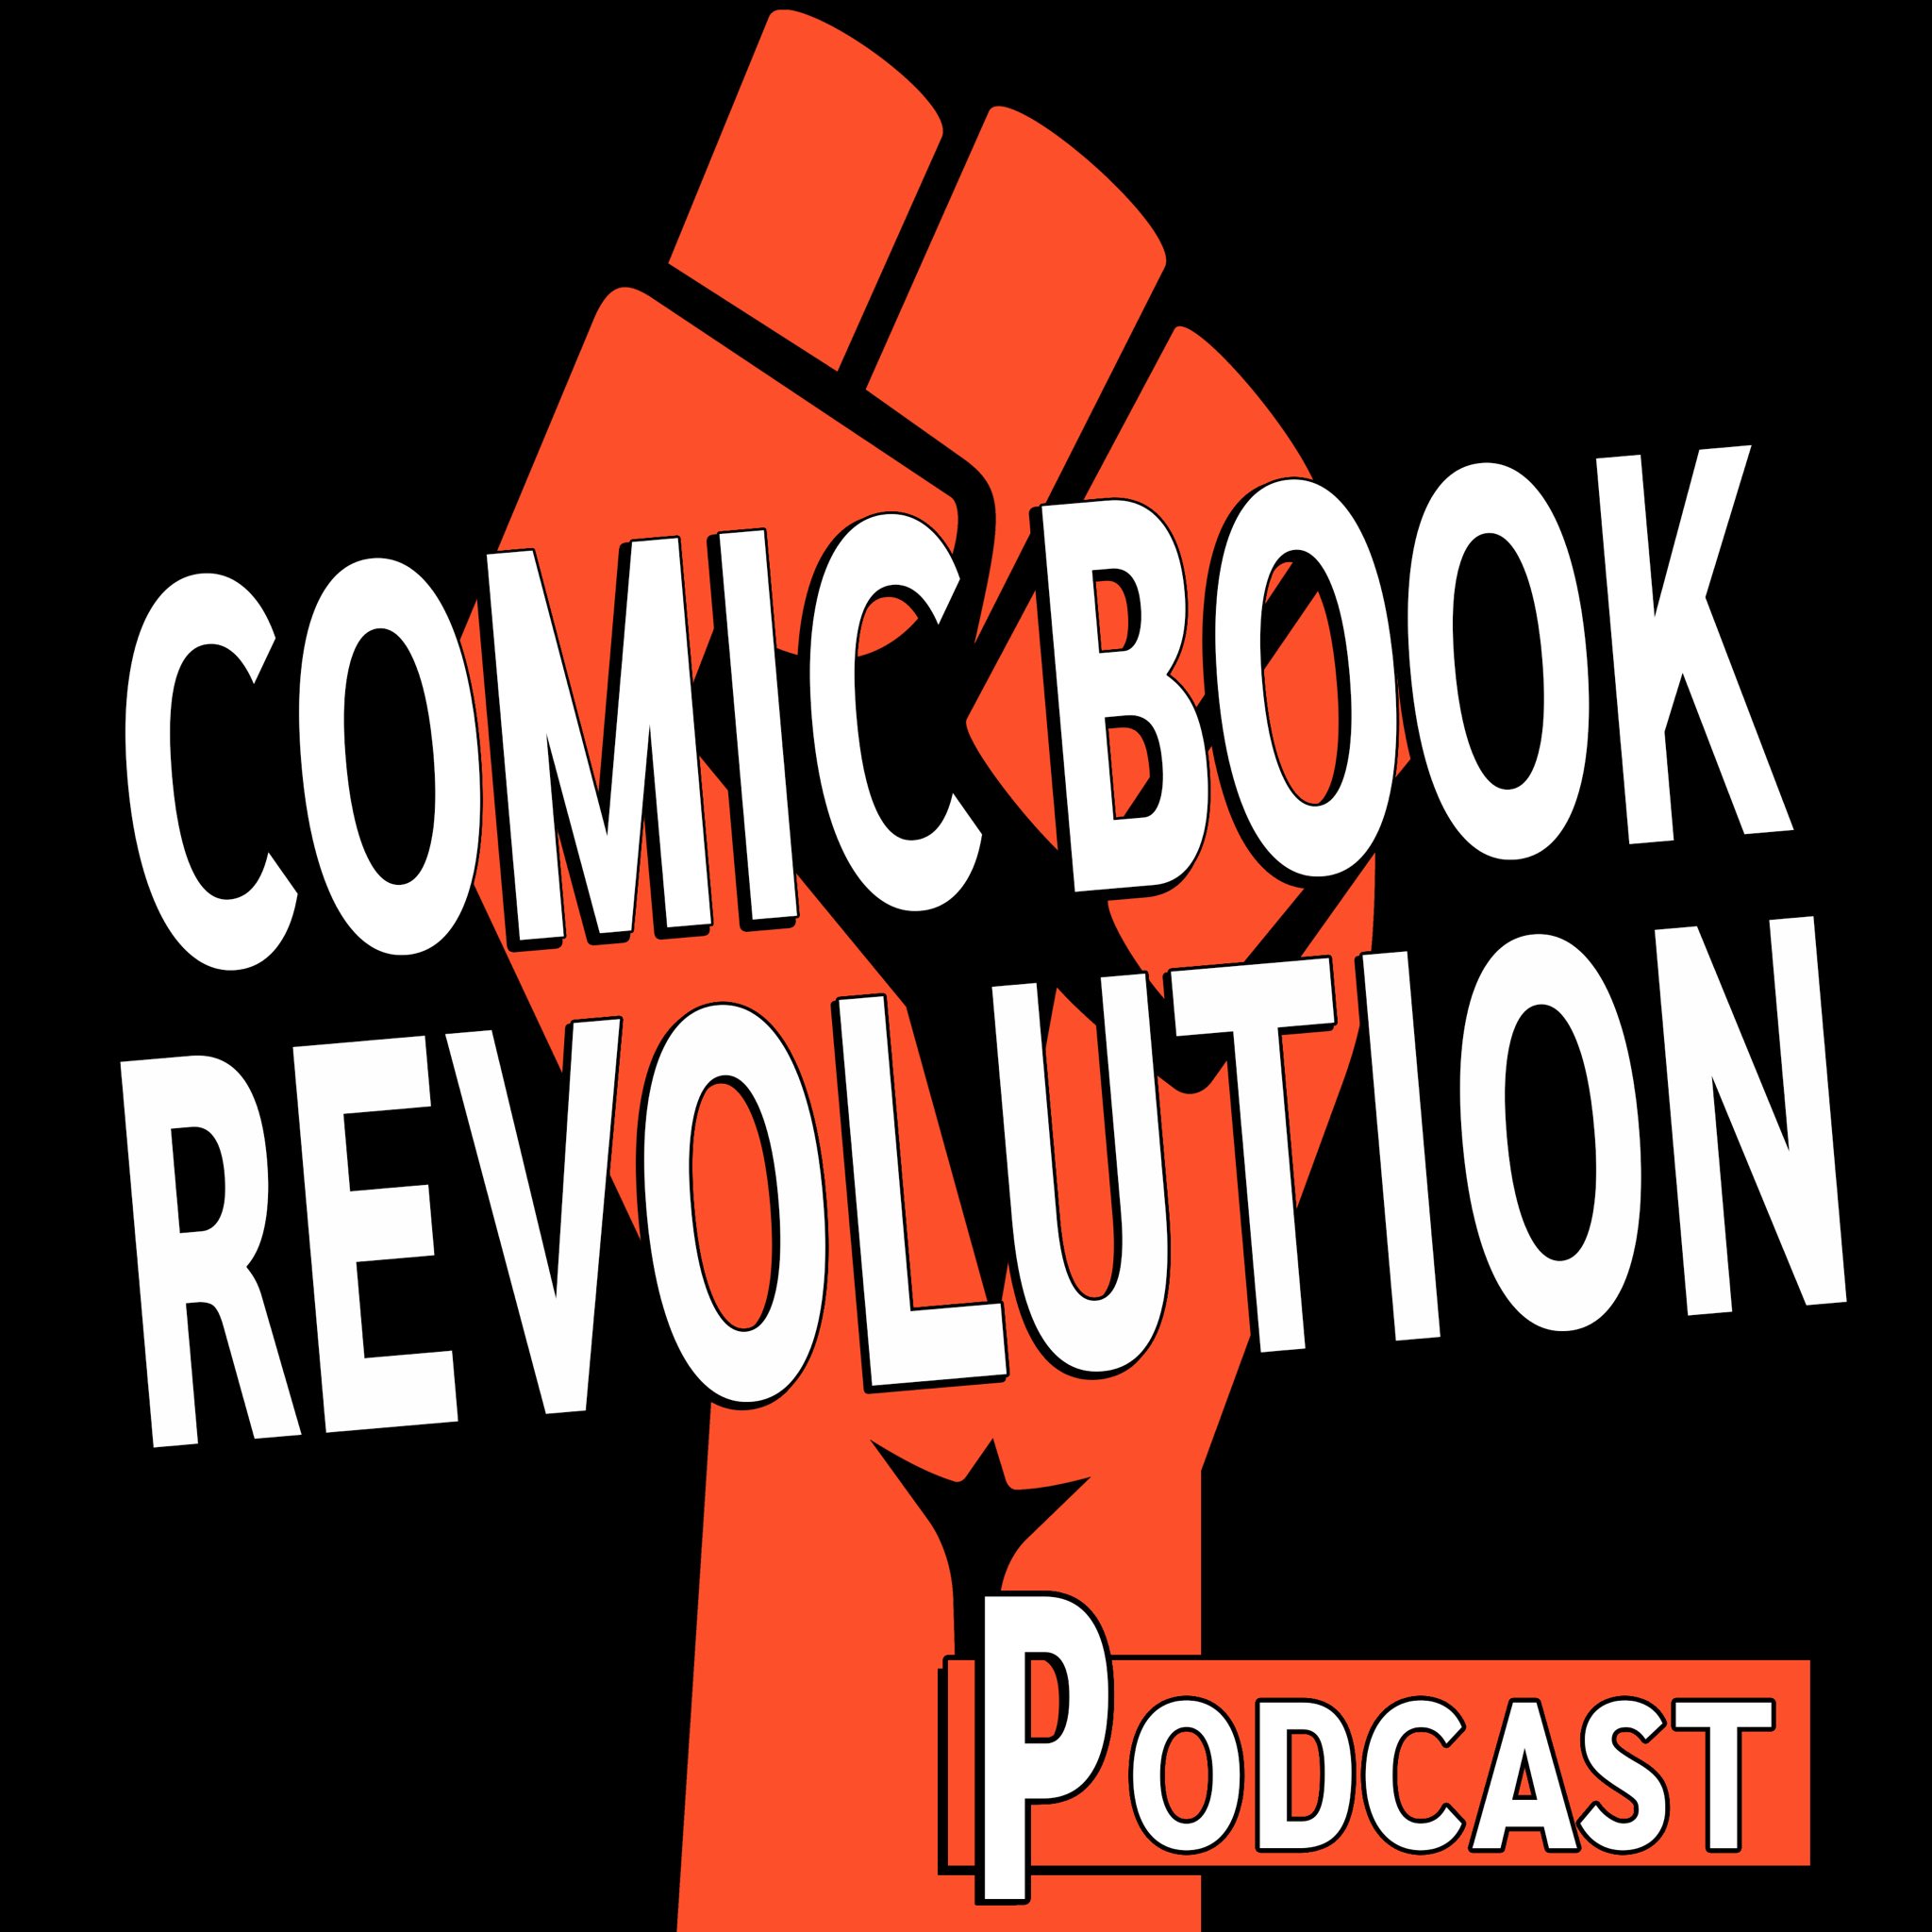 DC Studios Plan and 10 New Projects - Comic Book Revolution Podcast Ep. 104